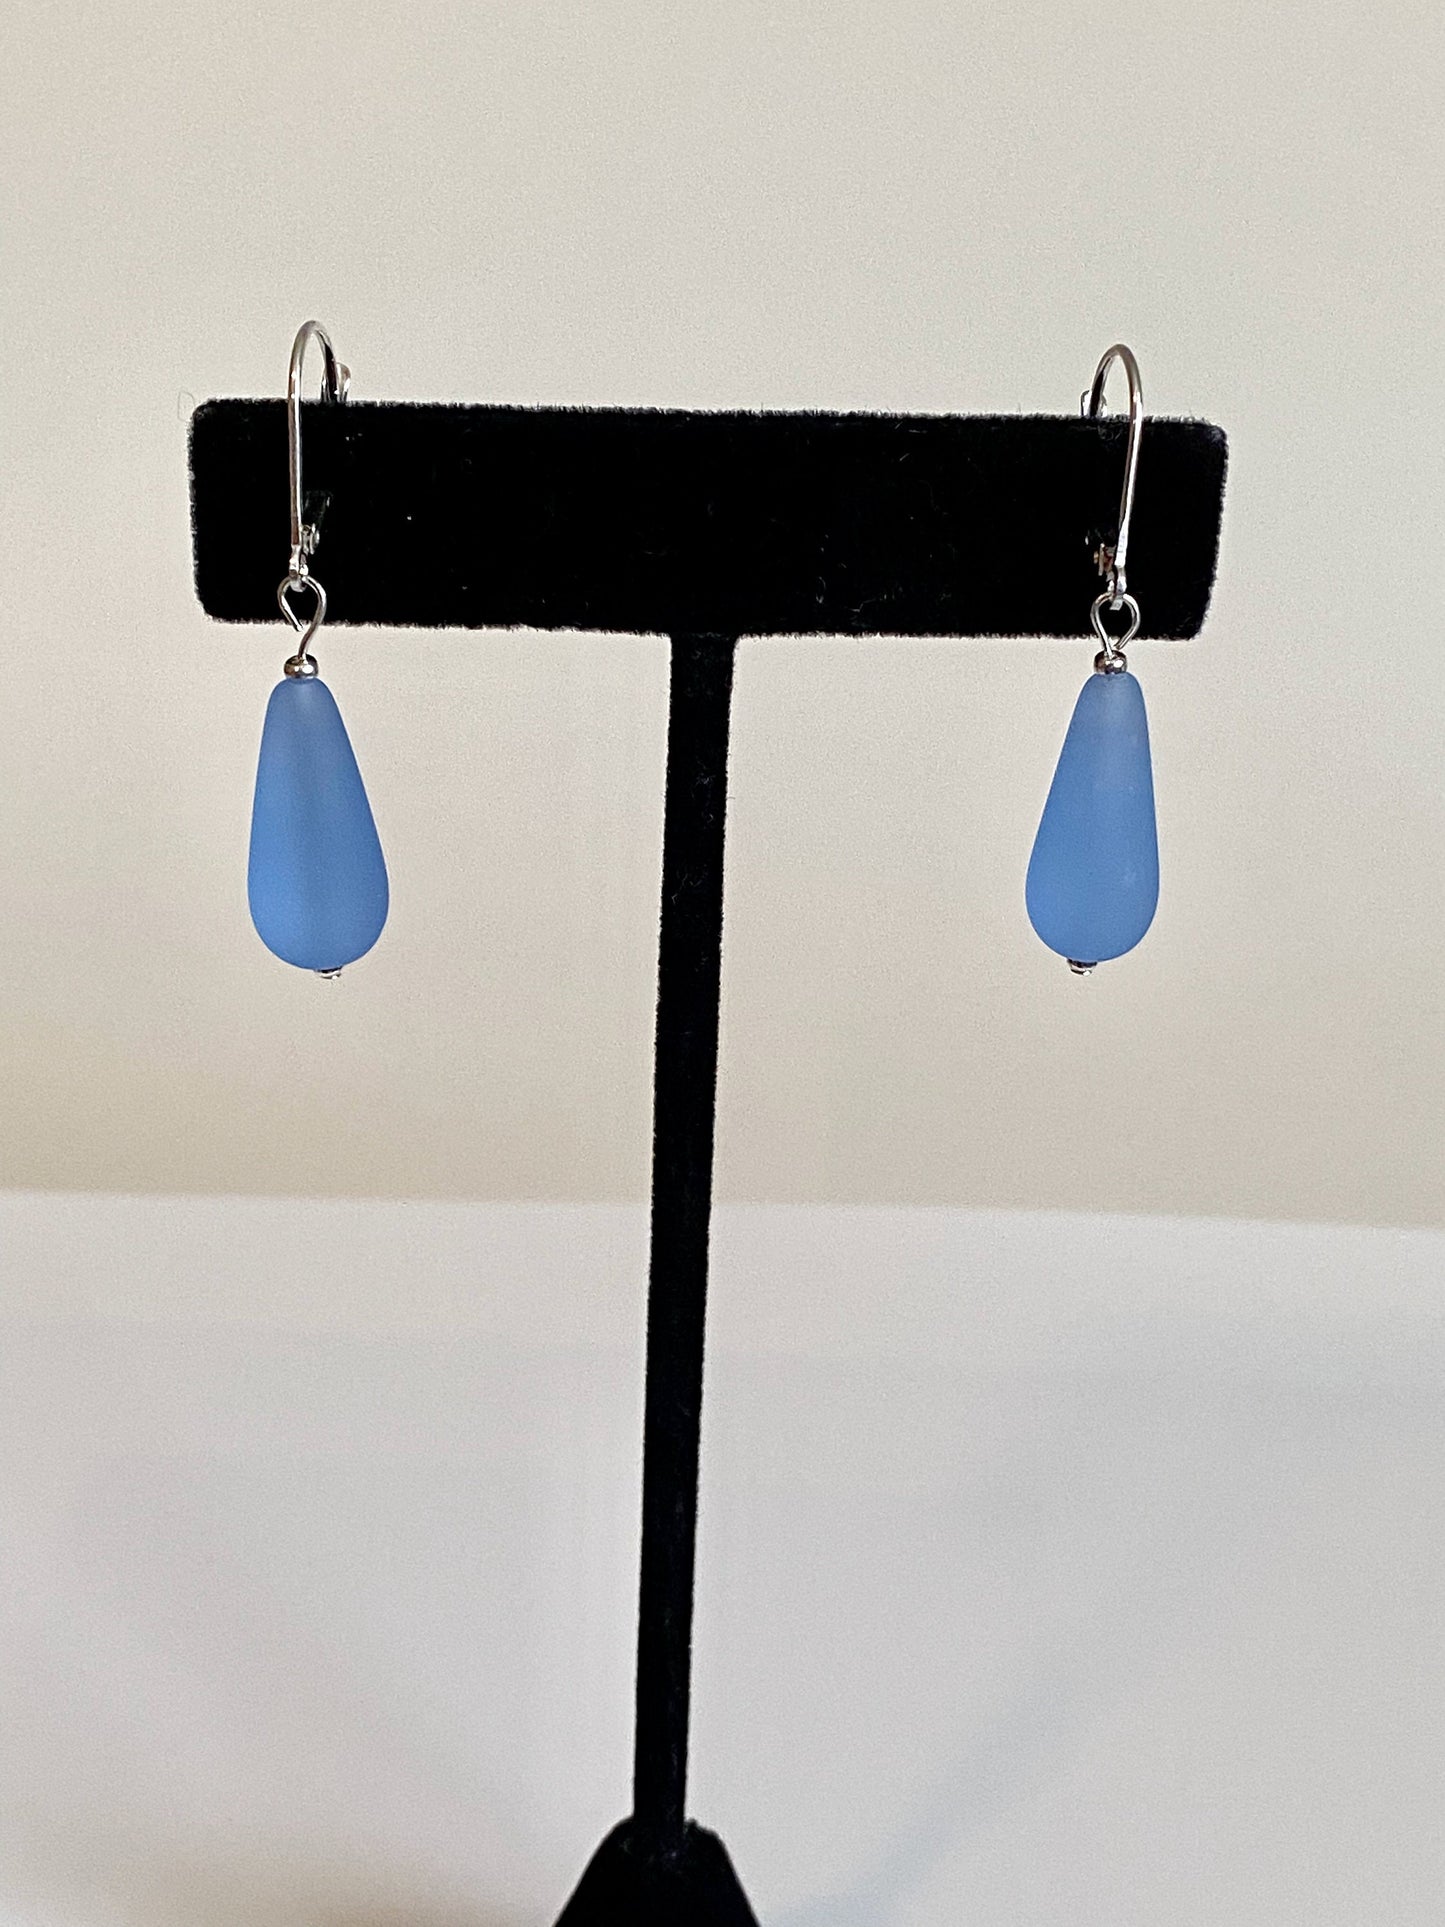 Soft sea glass type frosted sapphire blue teardrop earrings. Fashioned with a quality sterling silver lever back clasp.